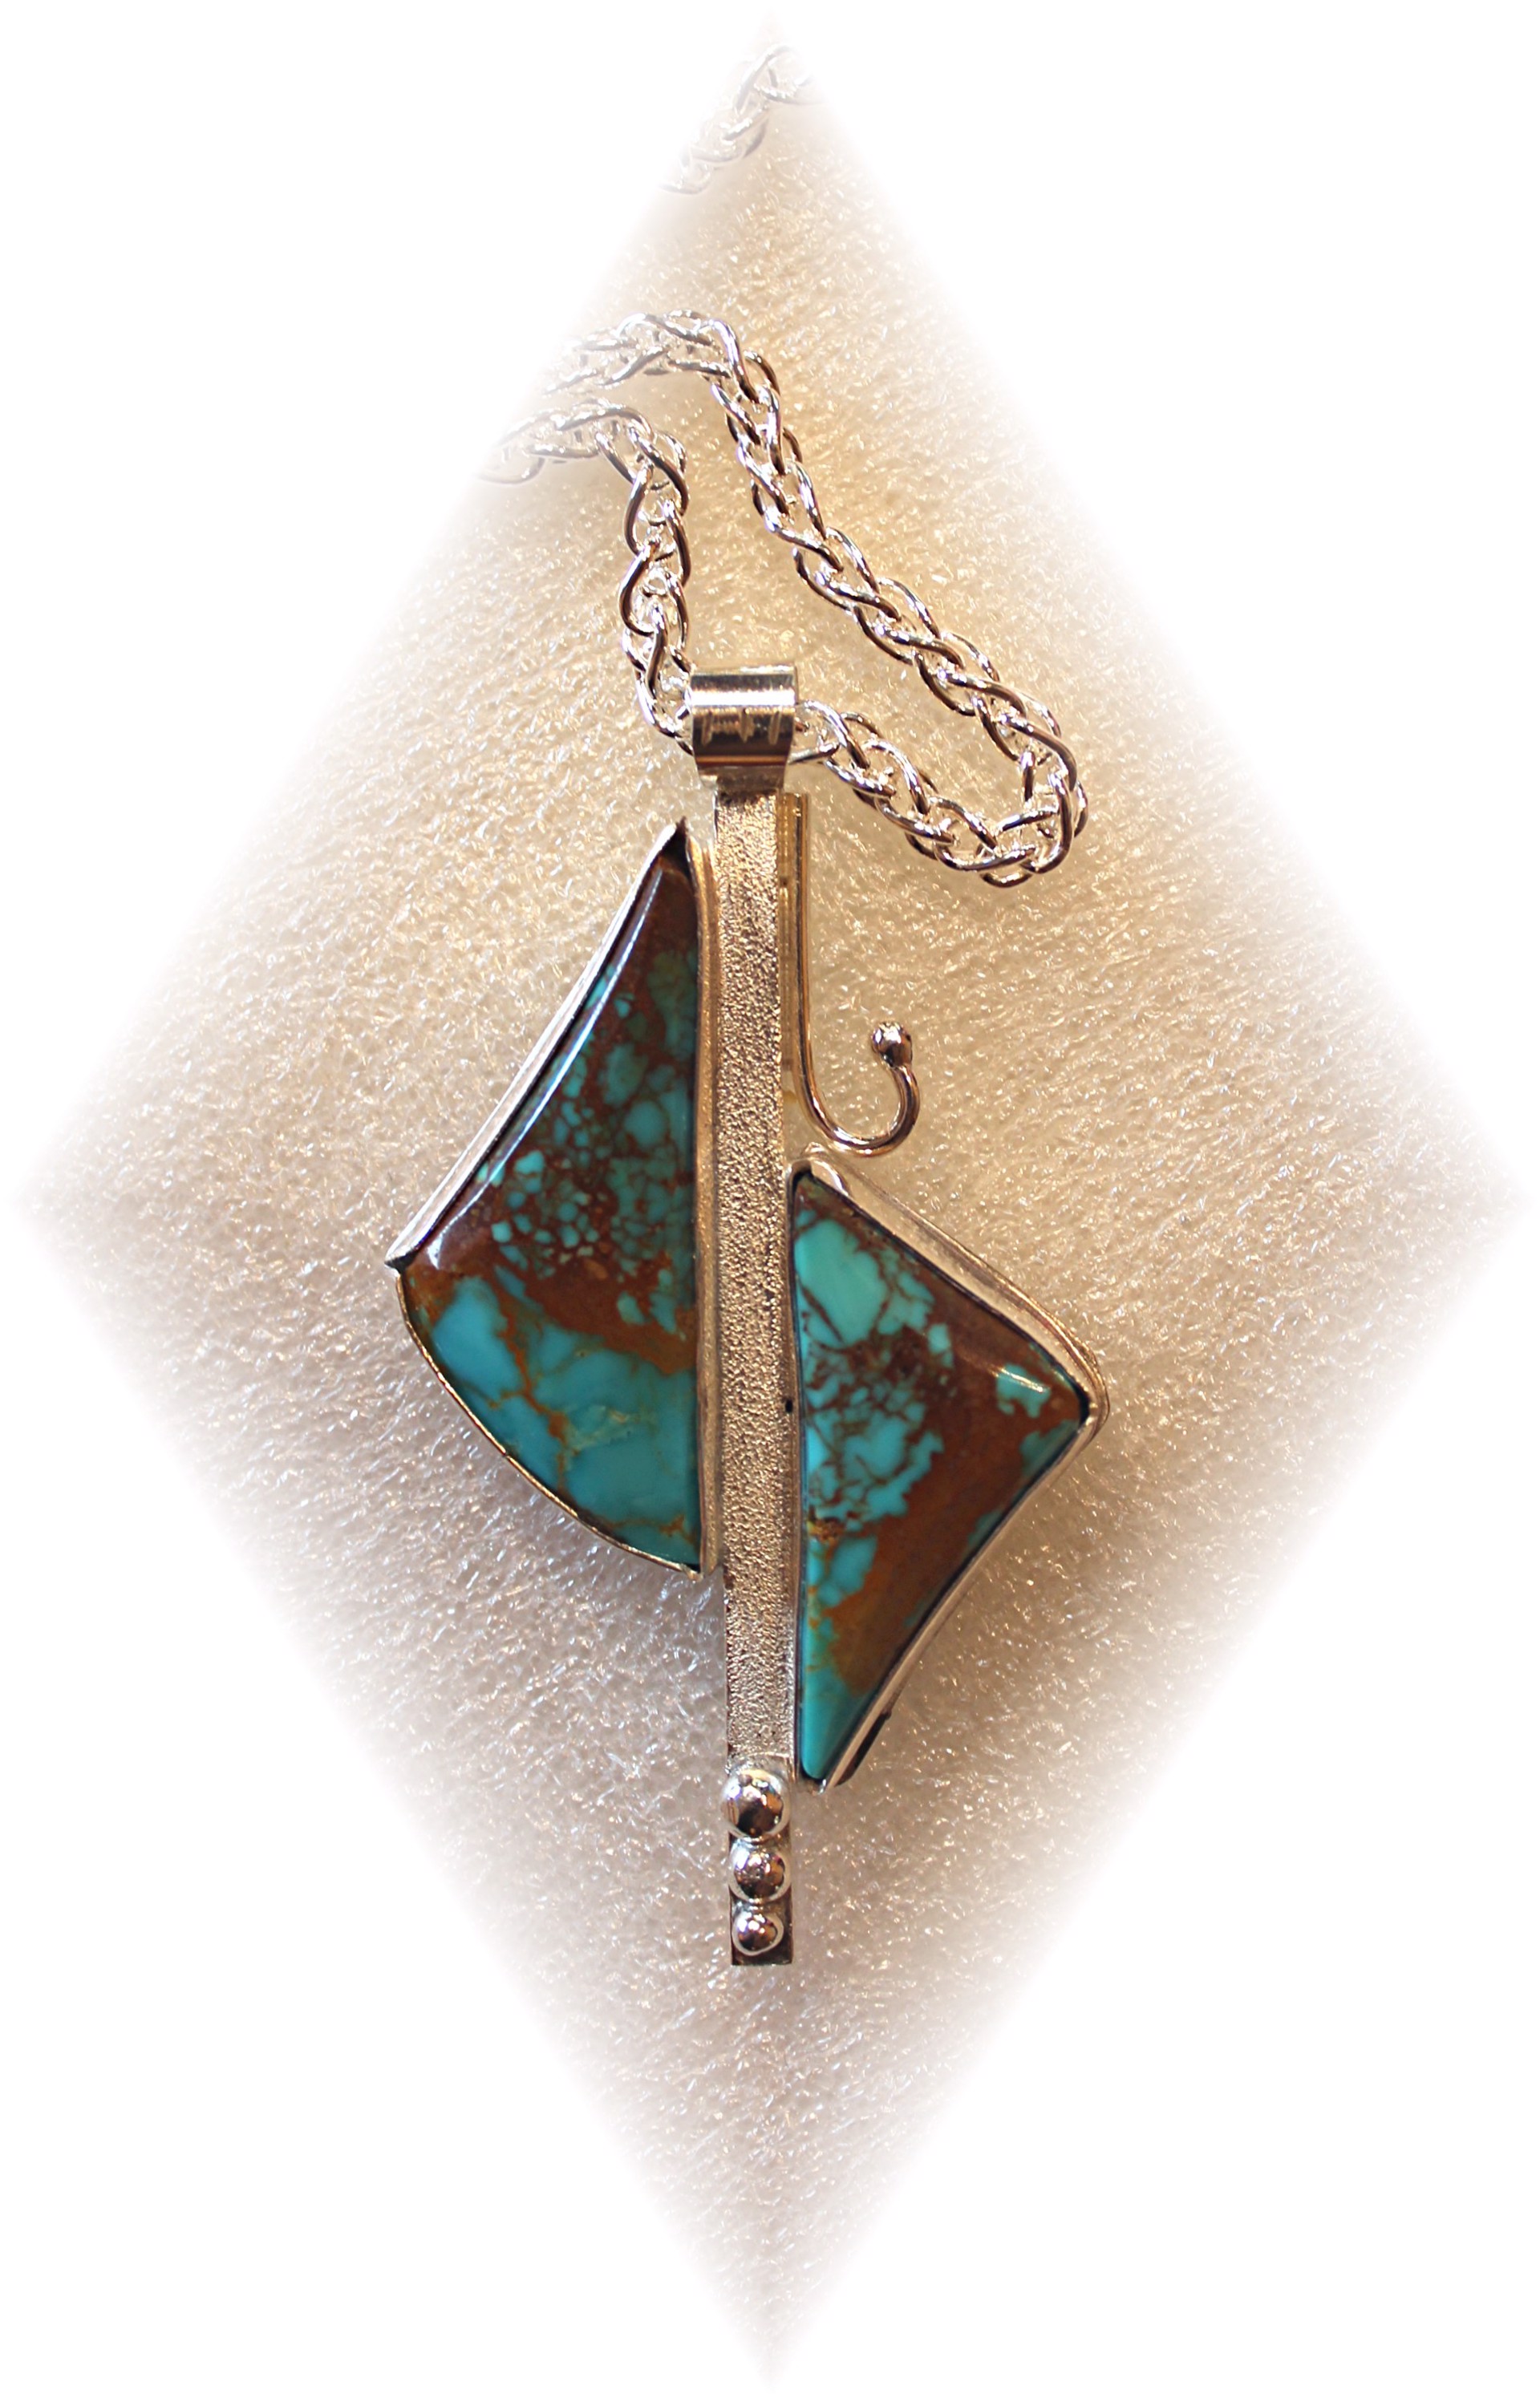 Twin Turquoise Triangles in Sterling Silver Pendant on Chain by Michael Redhawk